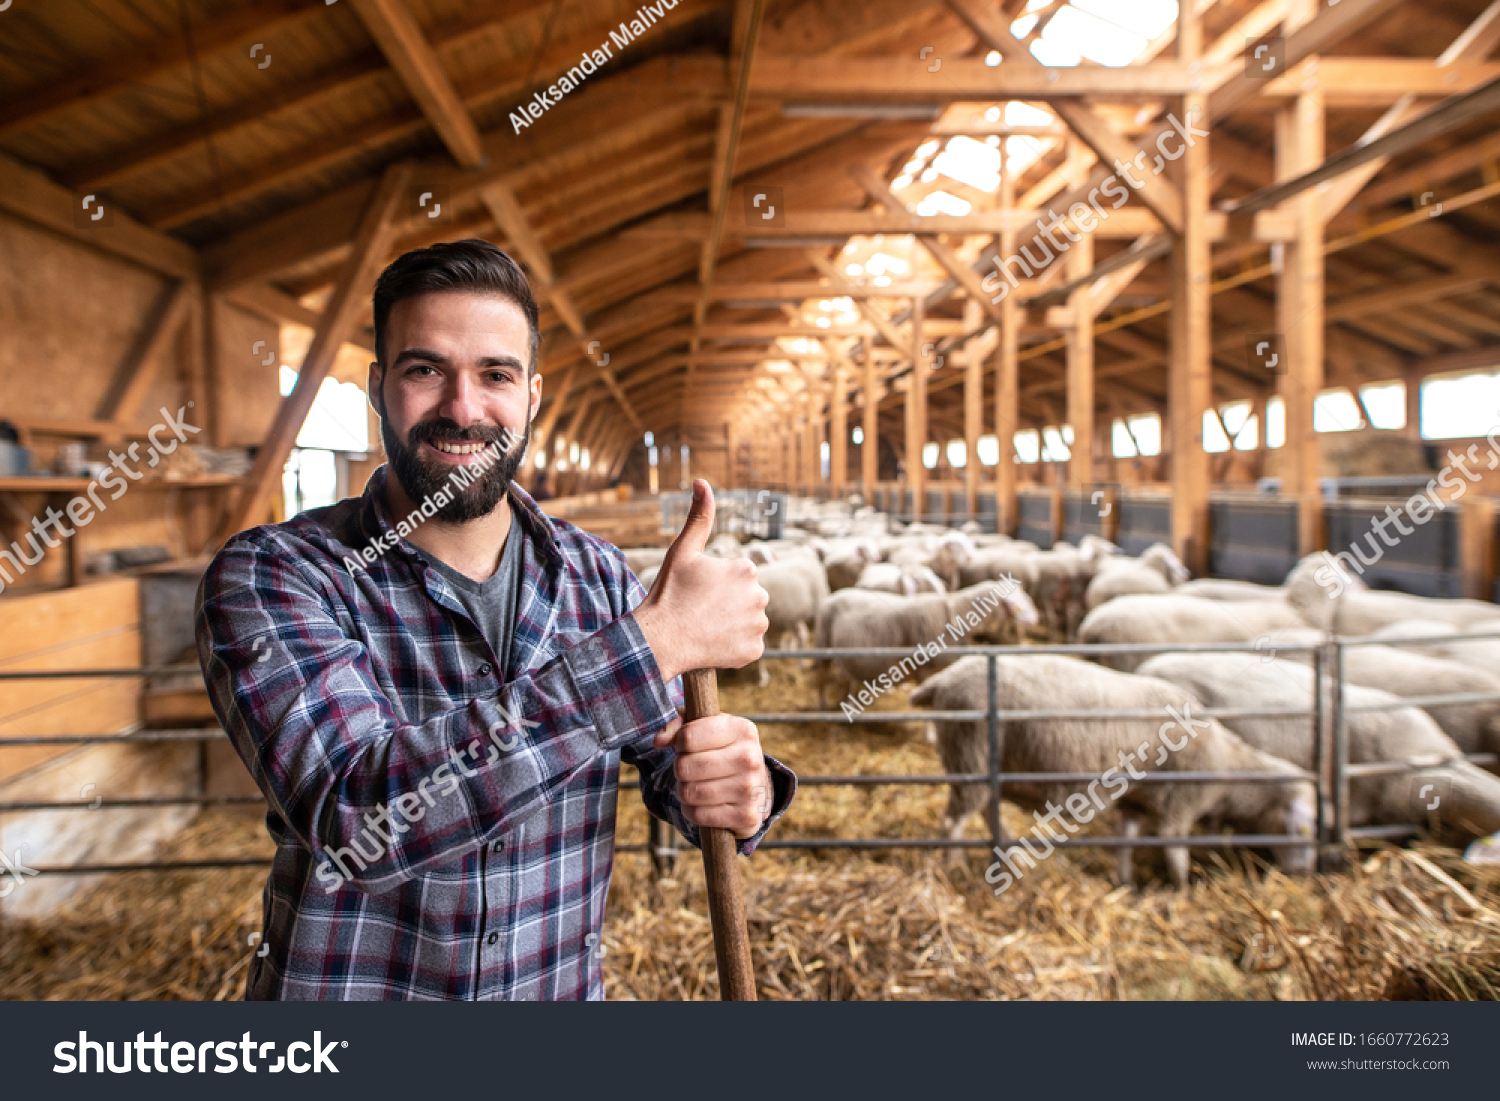 Cattleman farmer with thumbs up posing in wooden barn at he farm while sheep eating in background. #1660772623